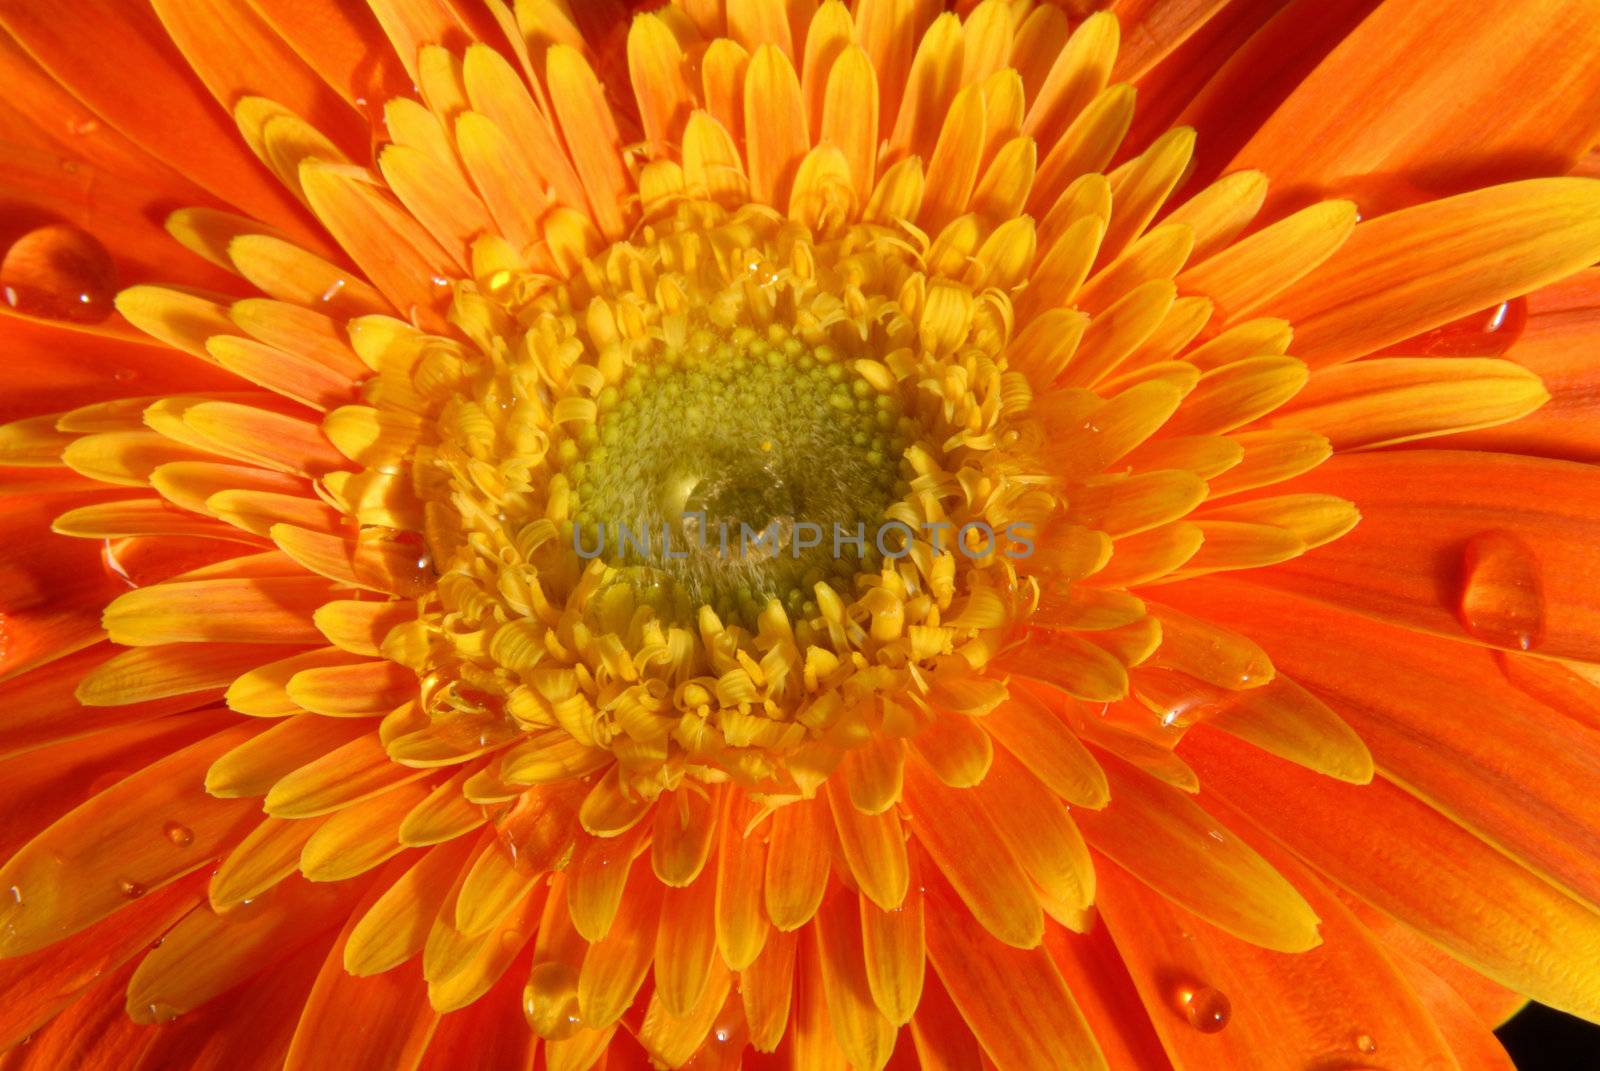 Orange gerbera flower texture close up with little water drops on black background.